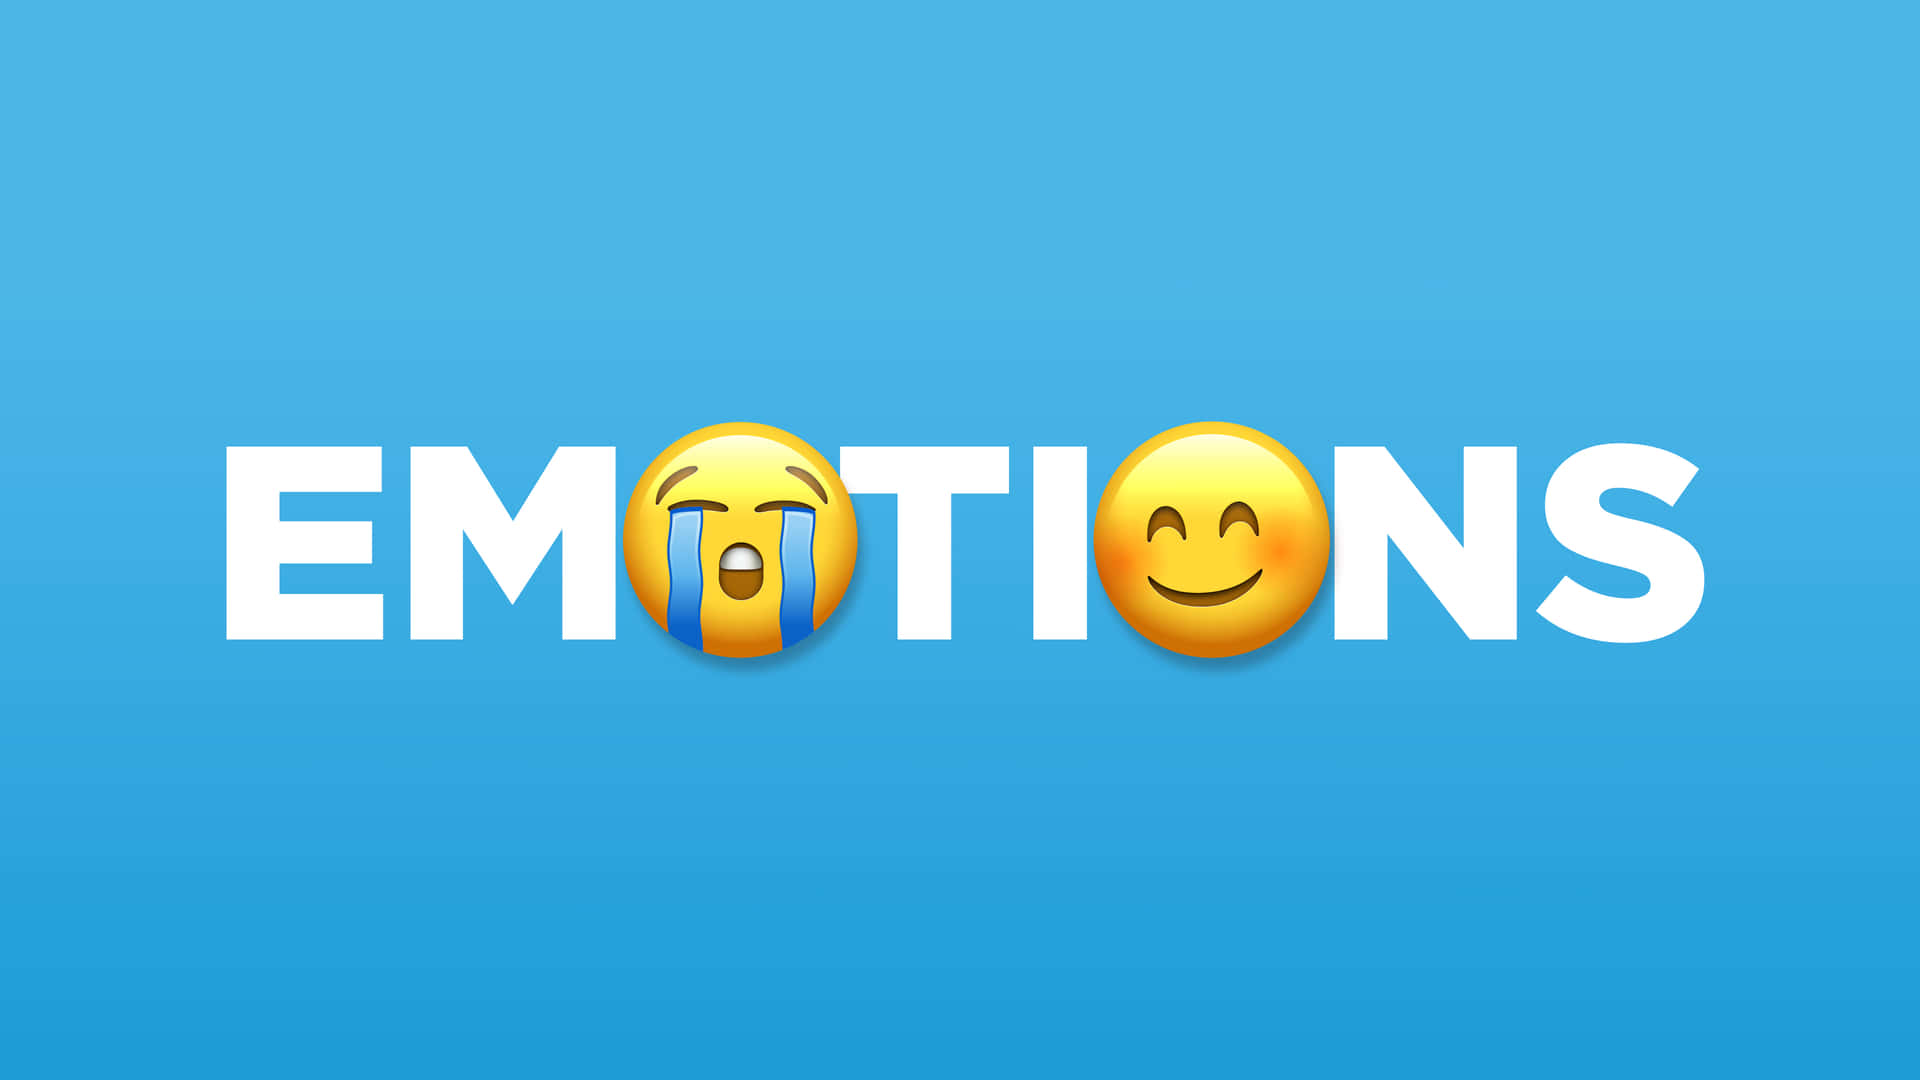 Emotions - A Blue Background With The Word Emotions